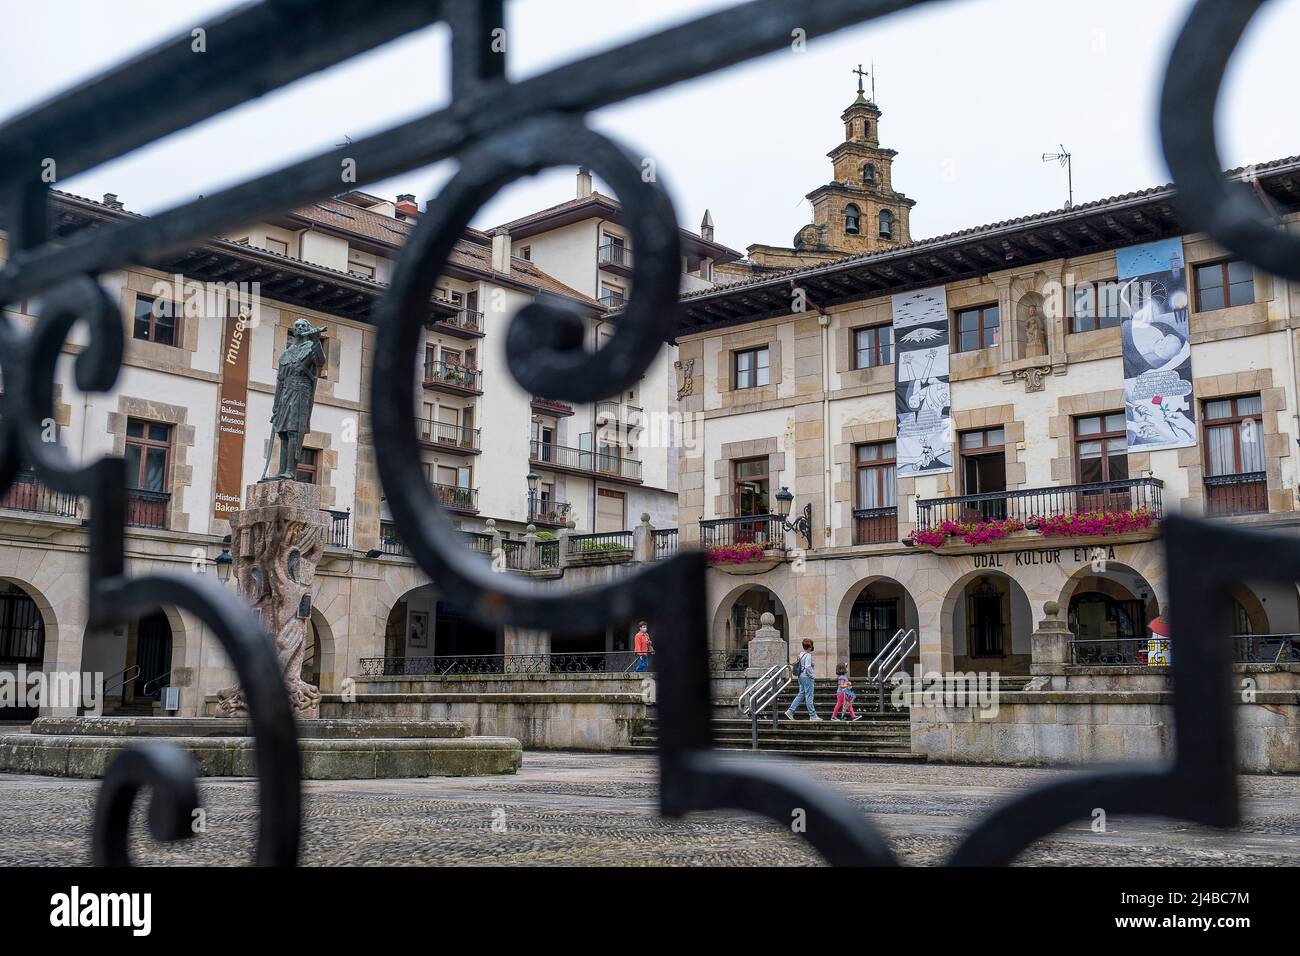 Don Tello Statue And Culture House In Plaza Of The Jurisdictions, Gernika-Lumo, Basque Country, Spain Stock Photo